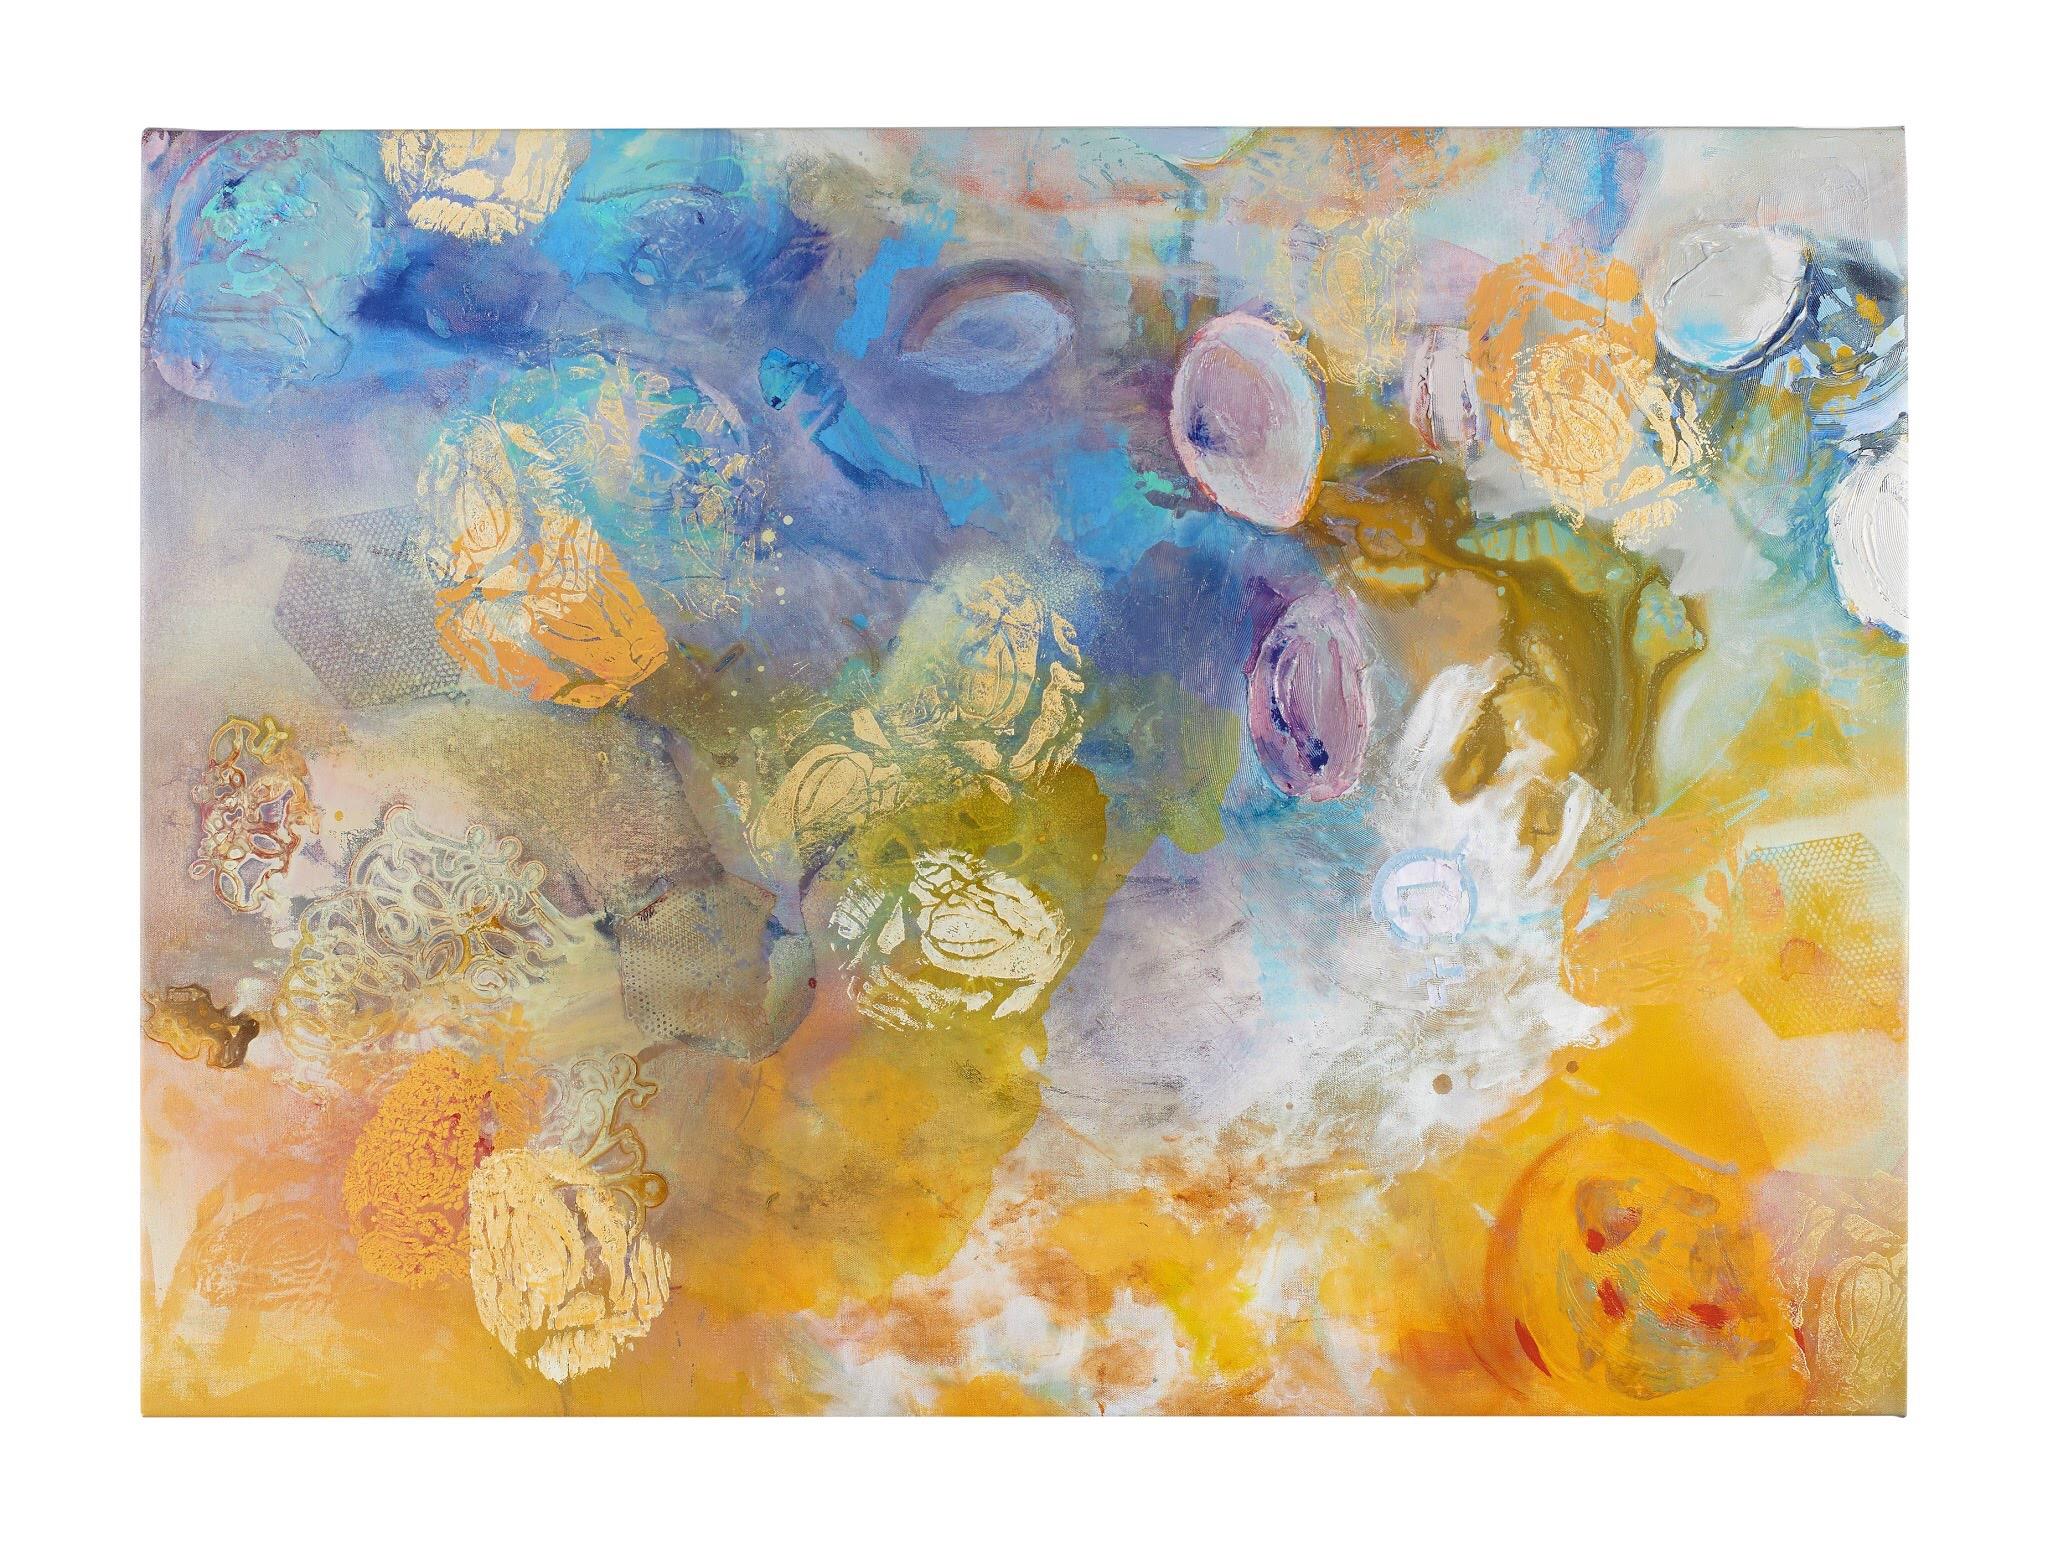 "Origins" - Beautiful Mixed Media Abstract Painting with Yellow, Blue, Orange